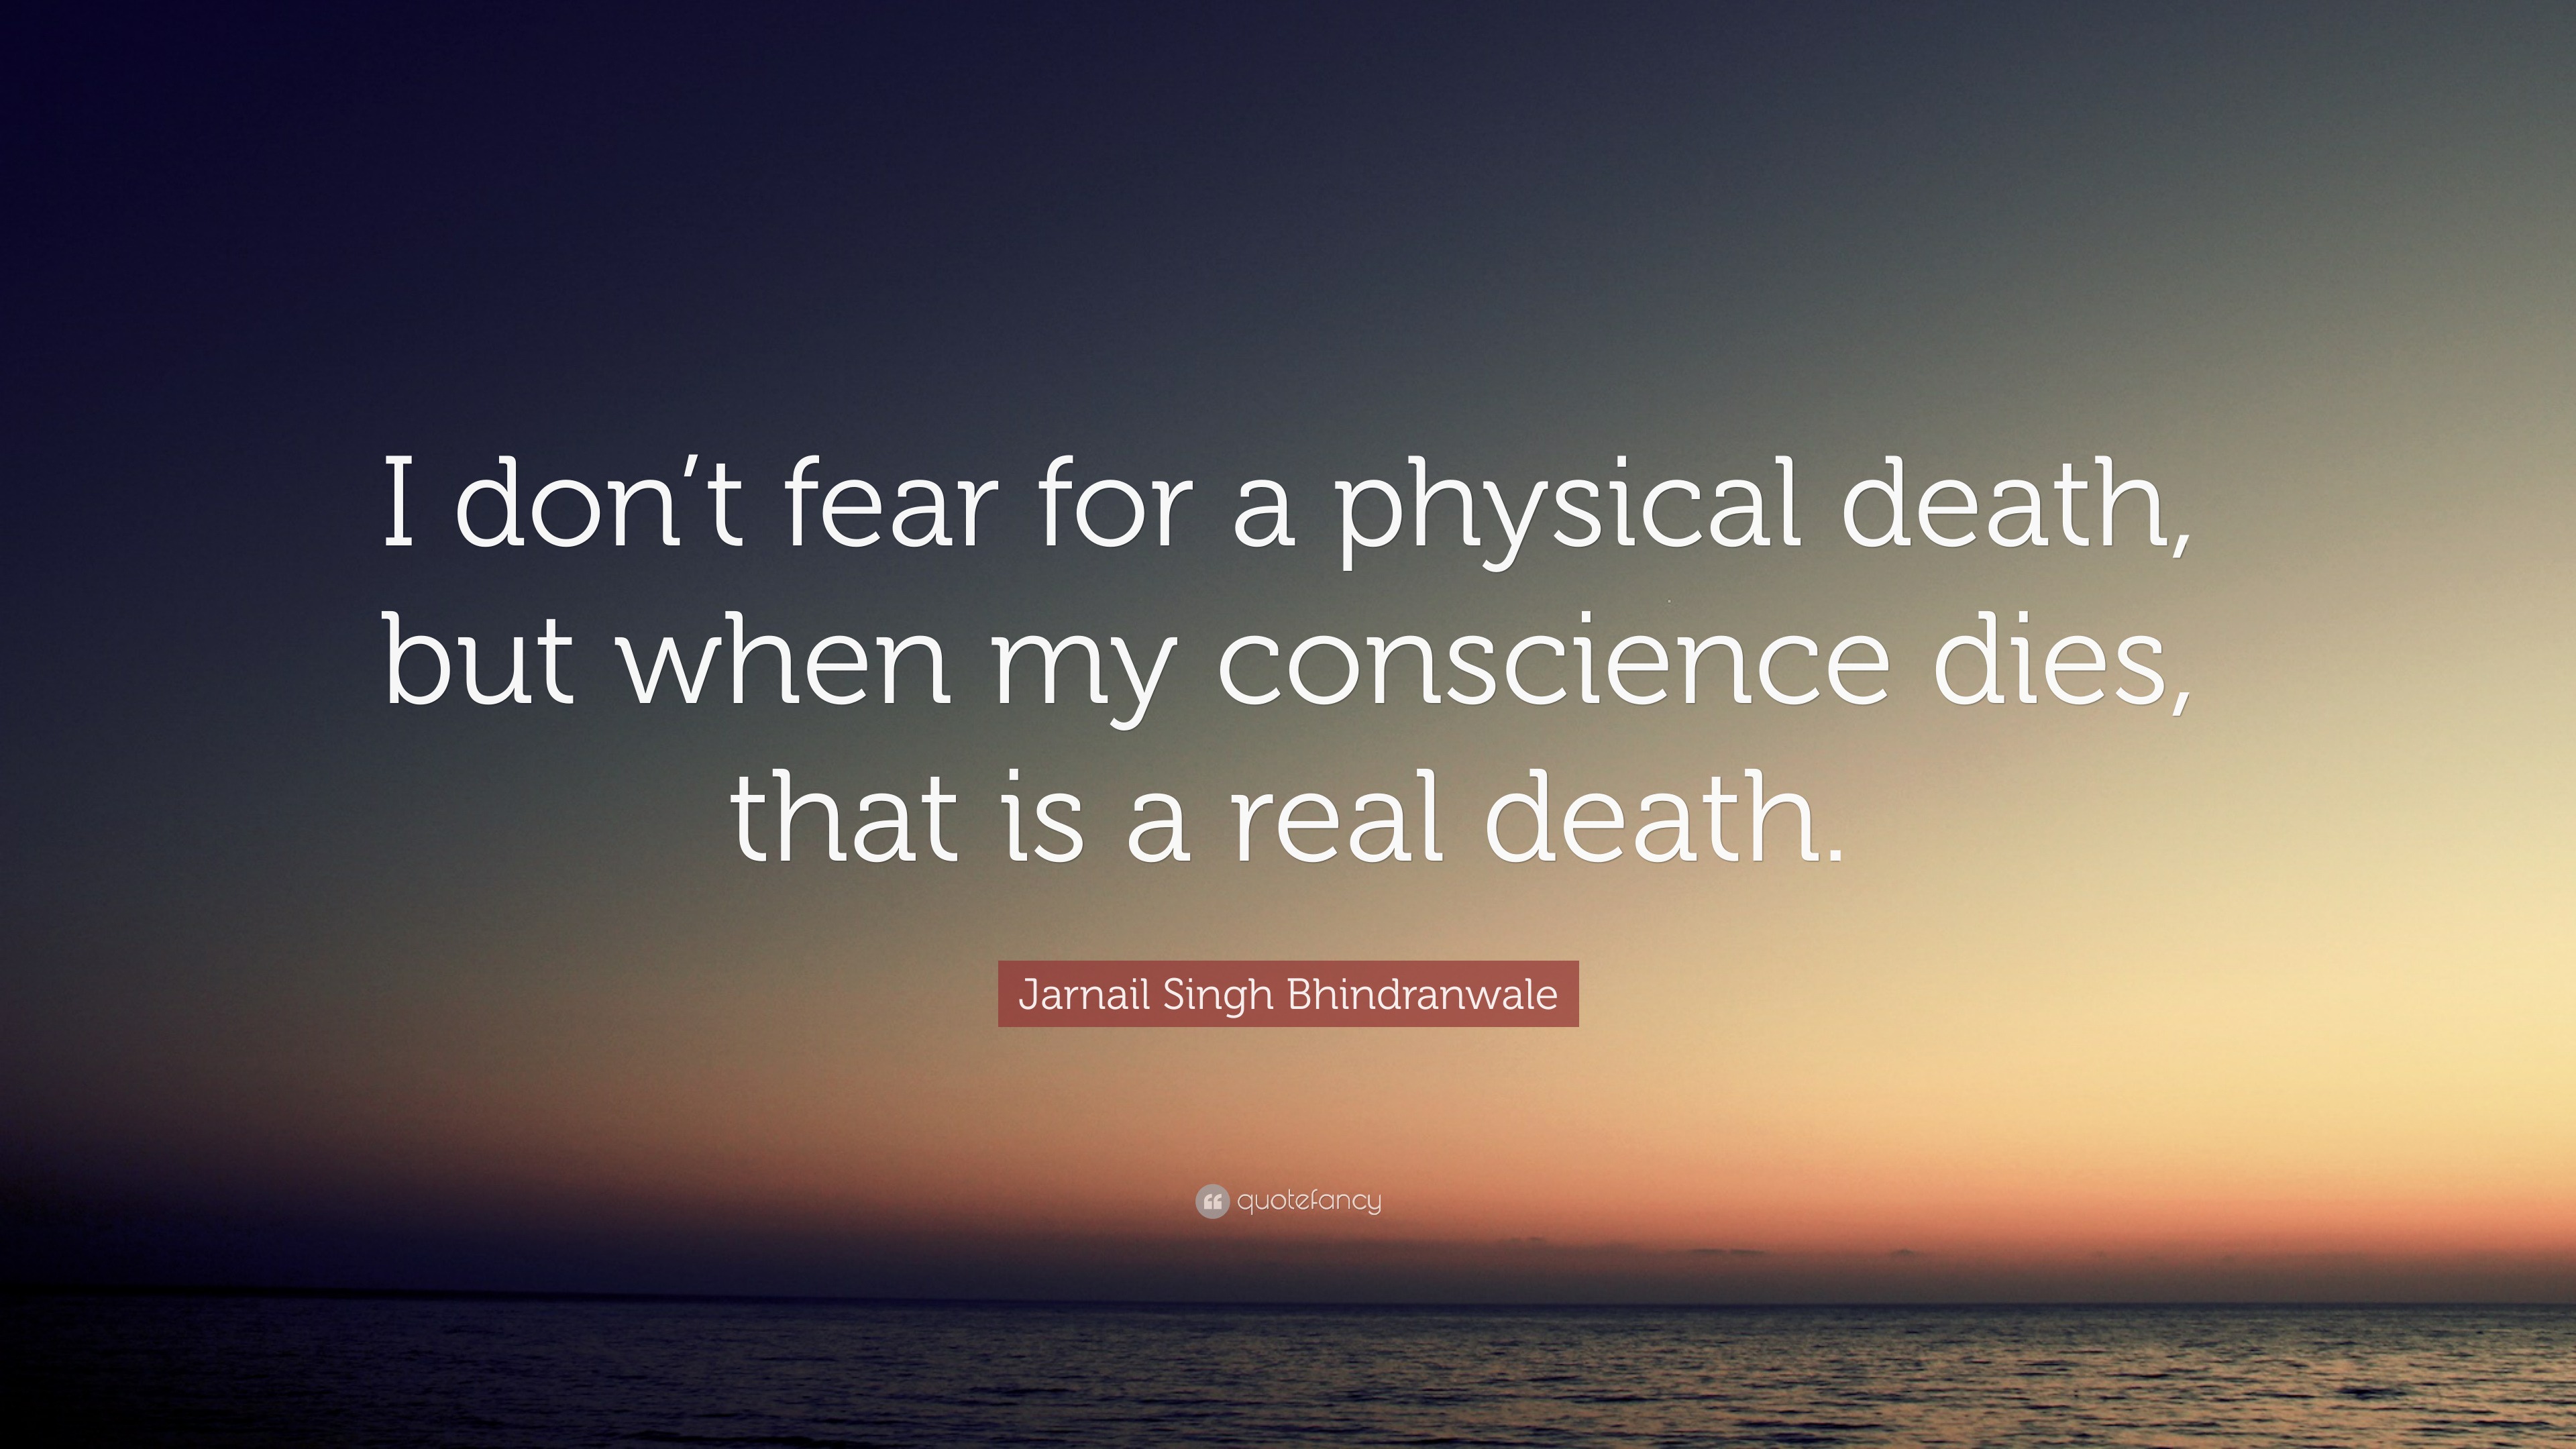 Jarnail Singh Bhindranwale Quote: “I don’t fear for a physical death ...